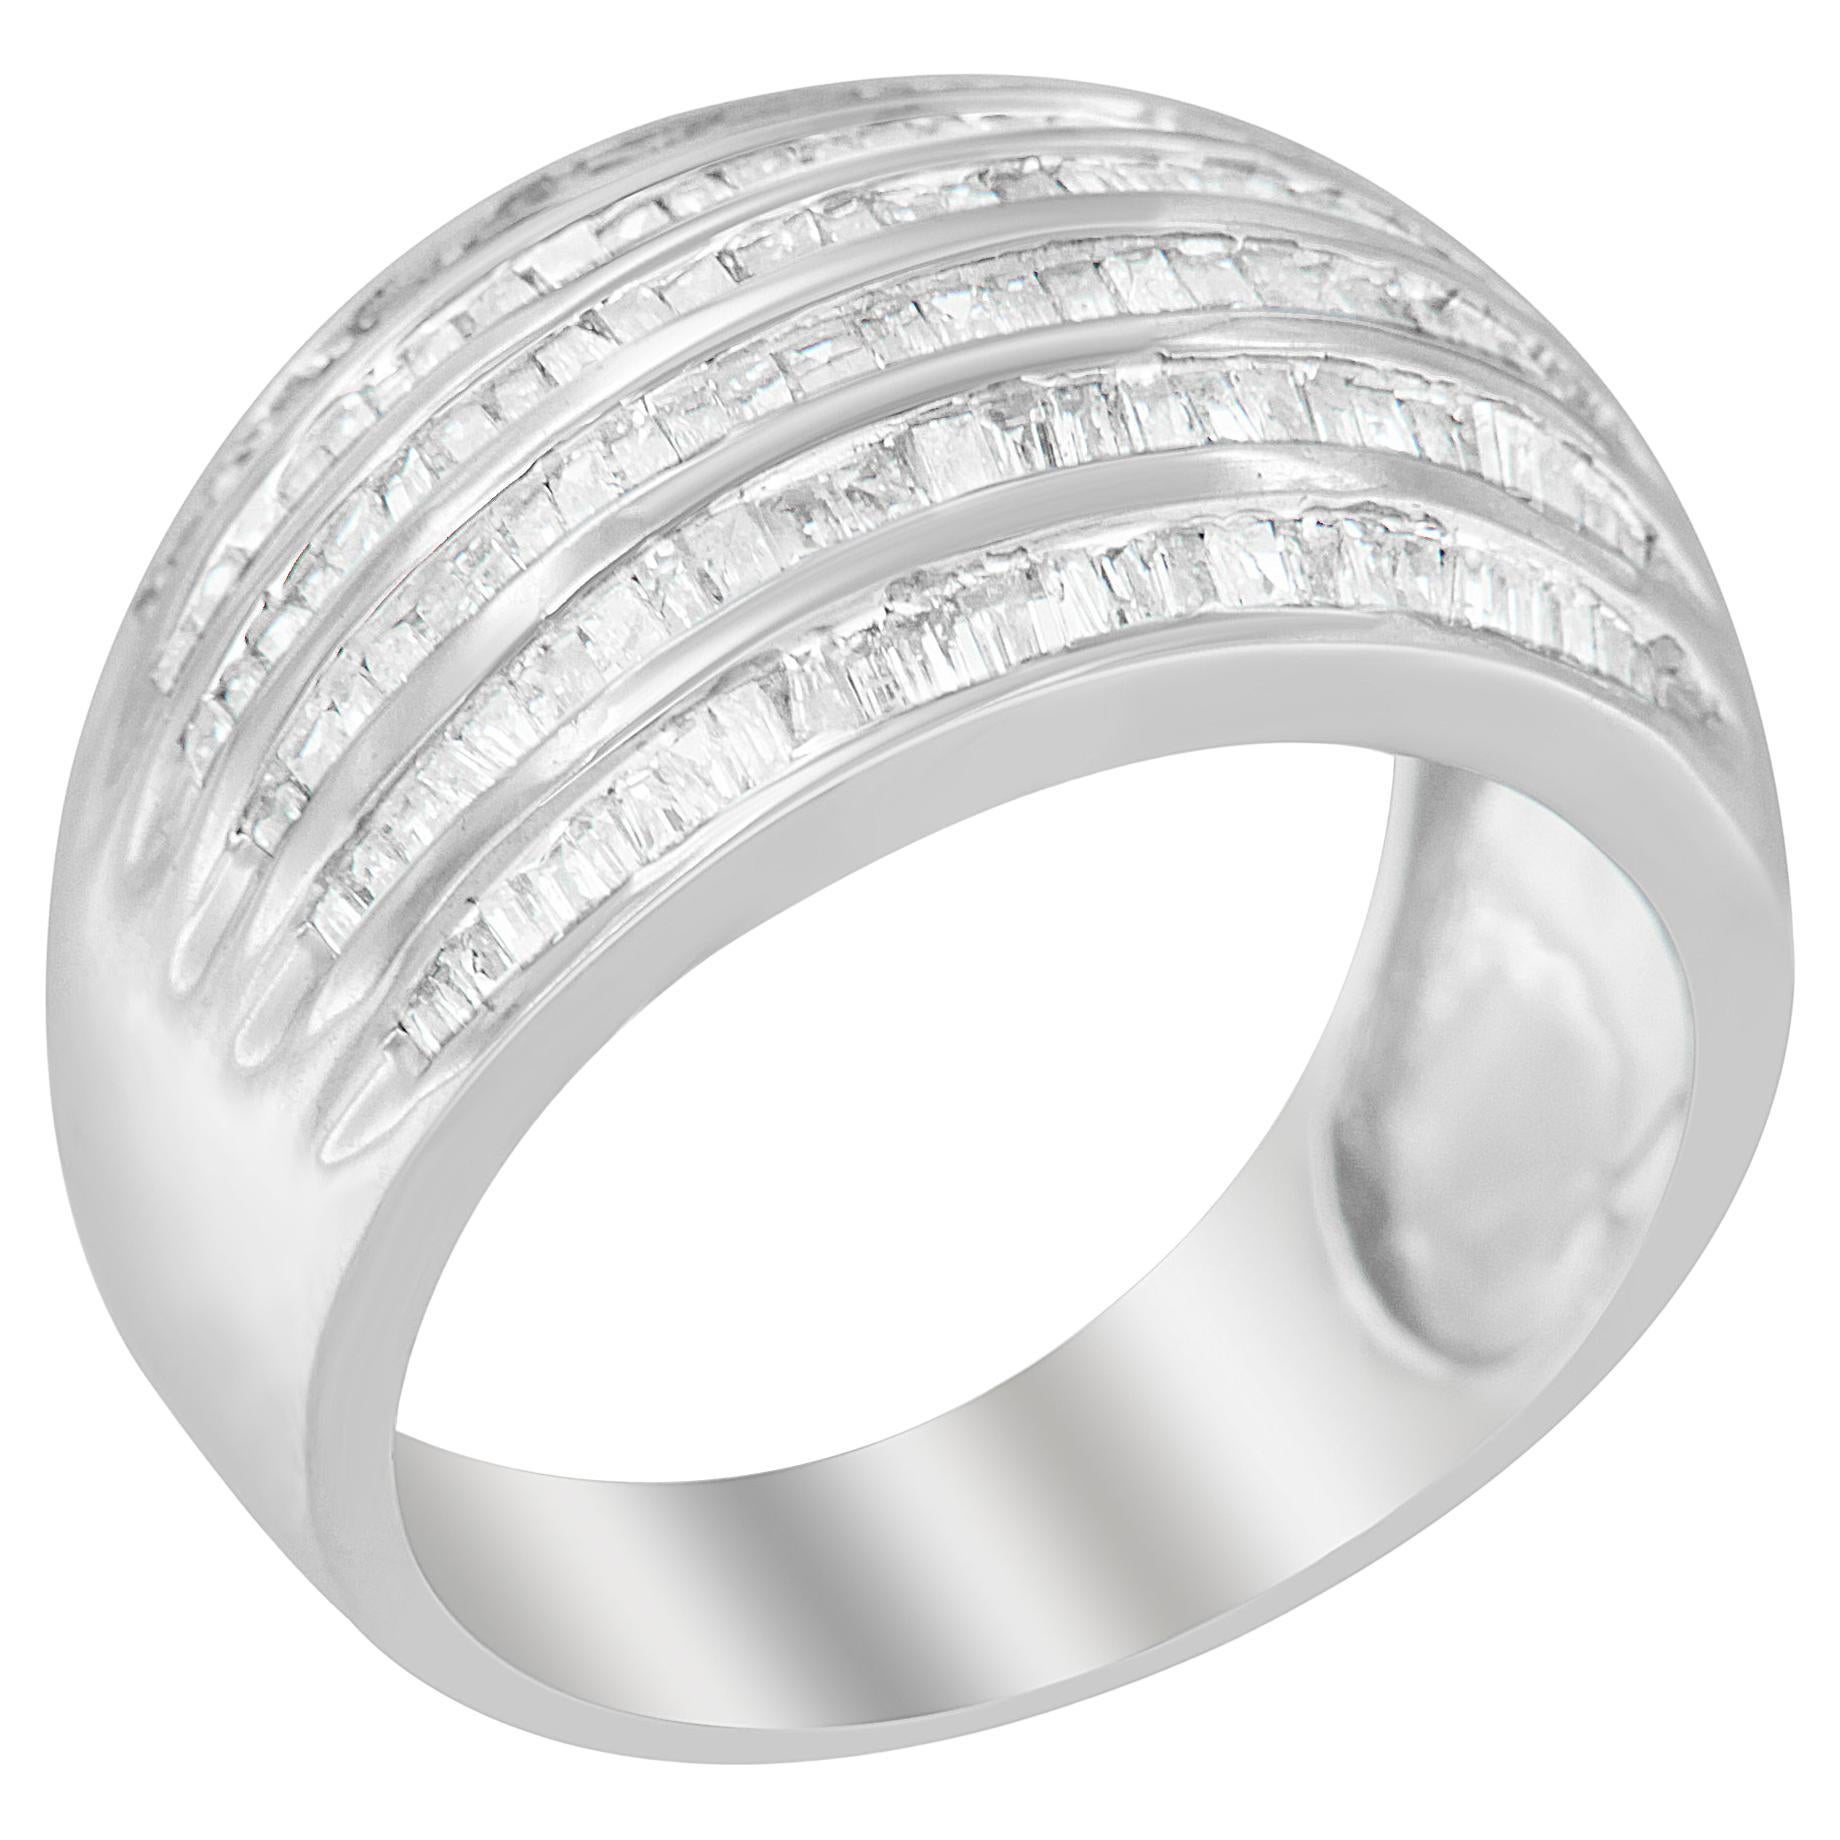 Sterling Silver 1.0 Carat Multi-Row Baguette Diamond Band Cocktail Ring